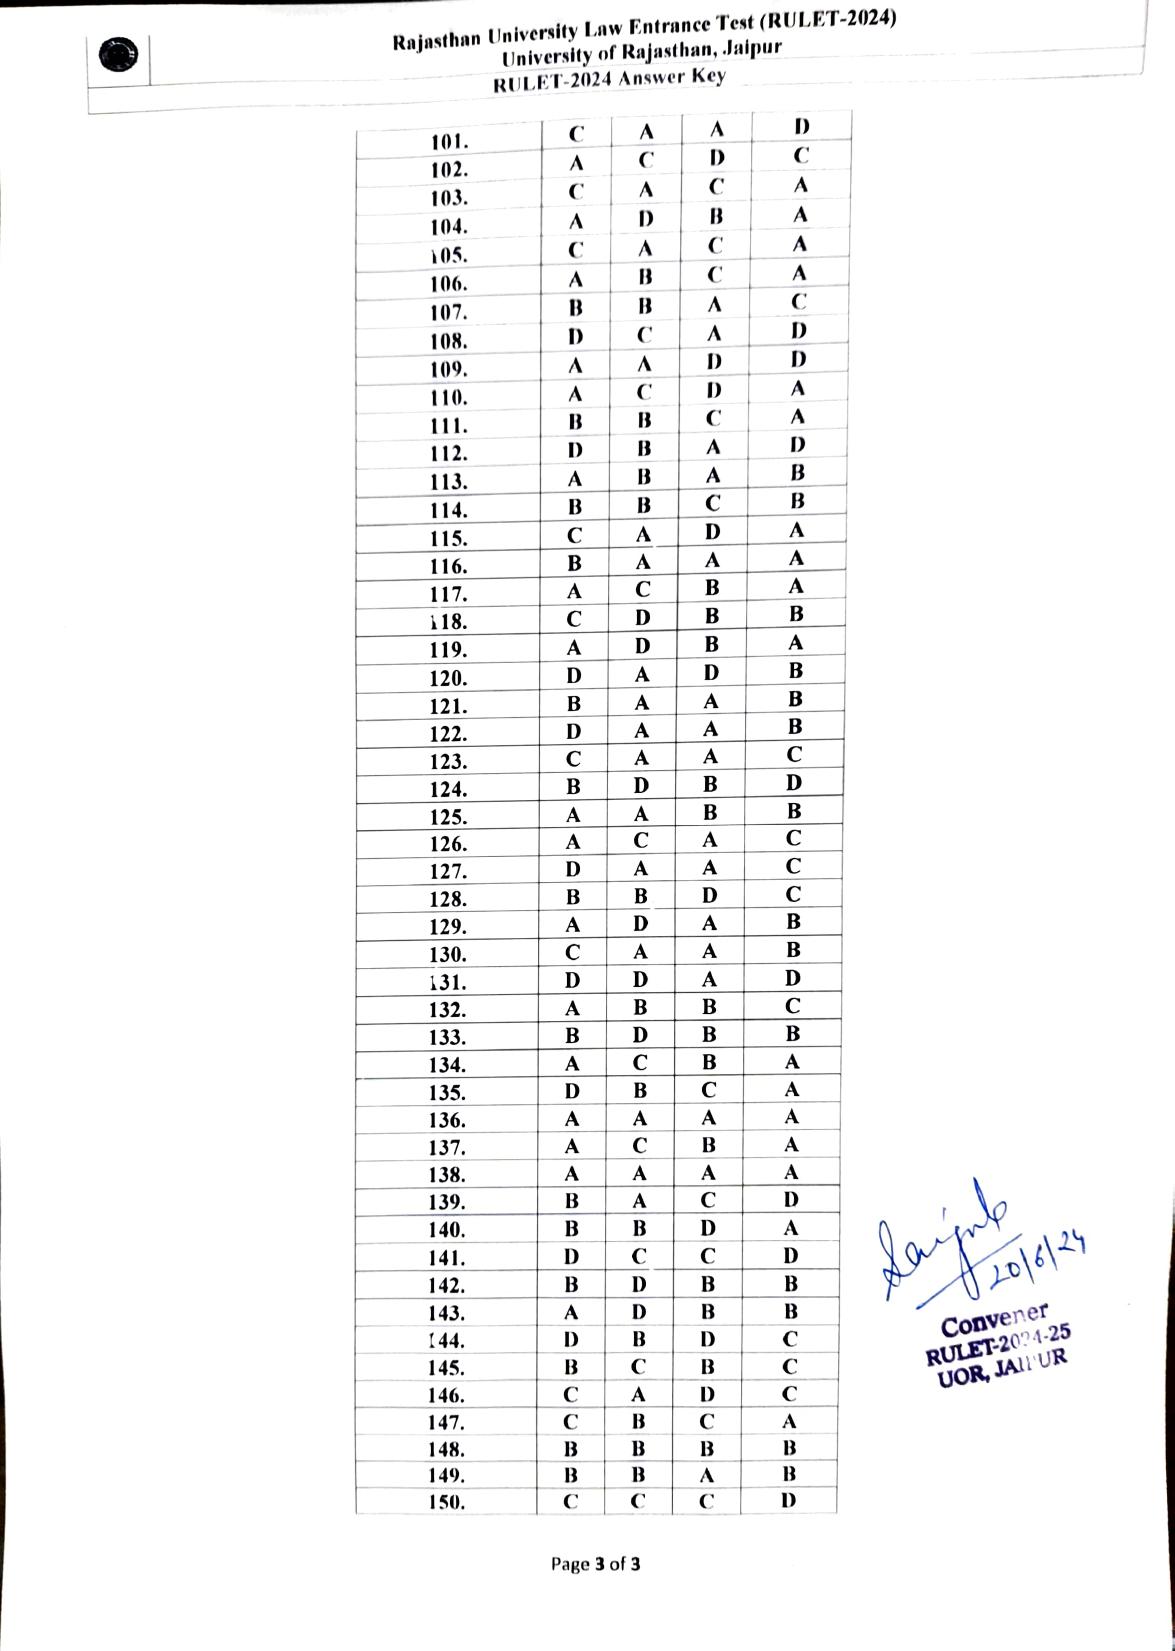 RULET 2024 Answer Key - Page 3